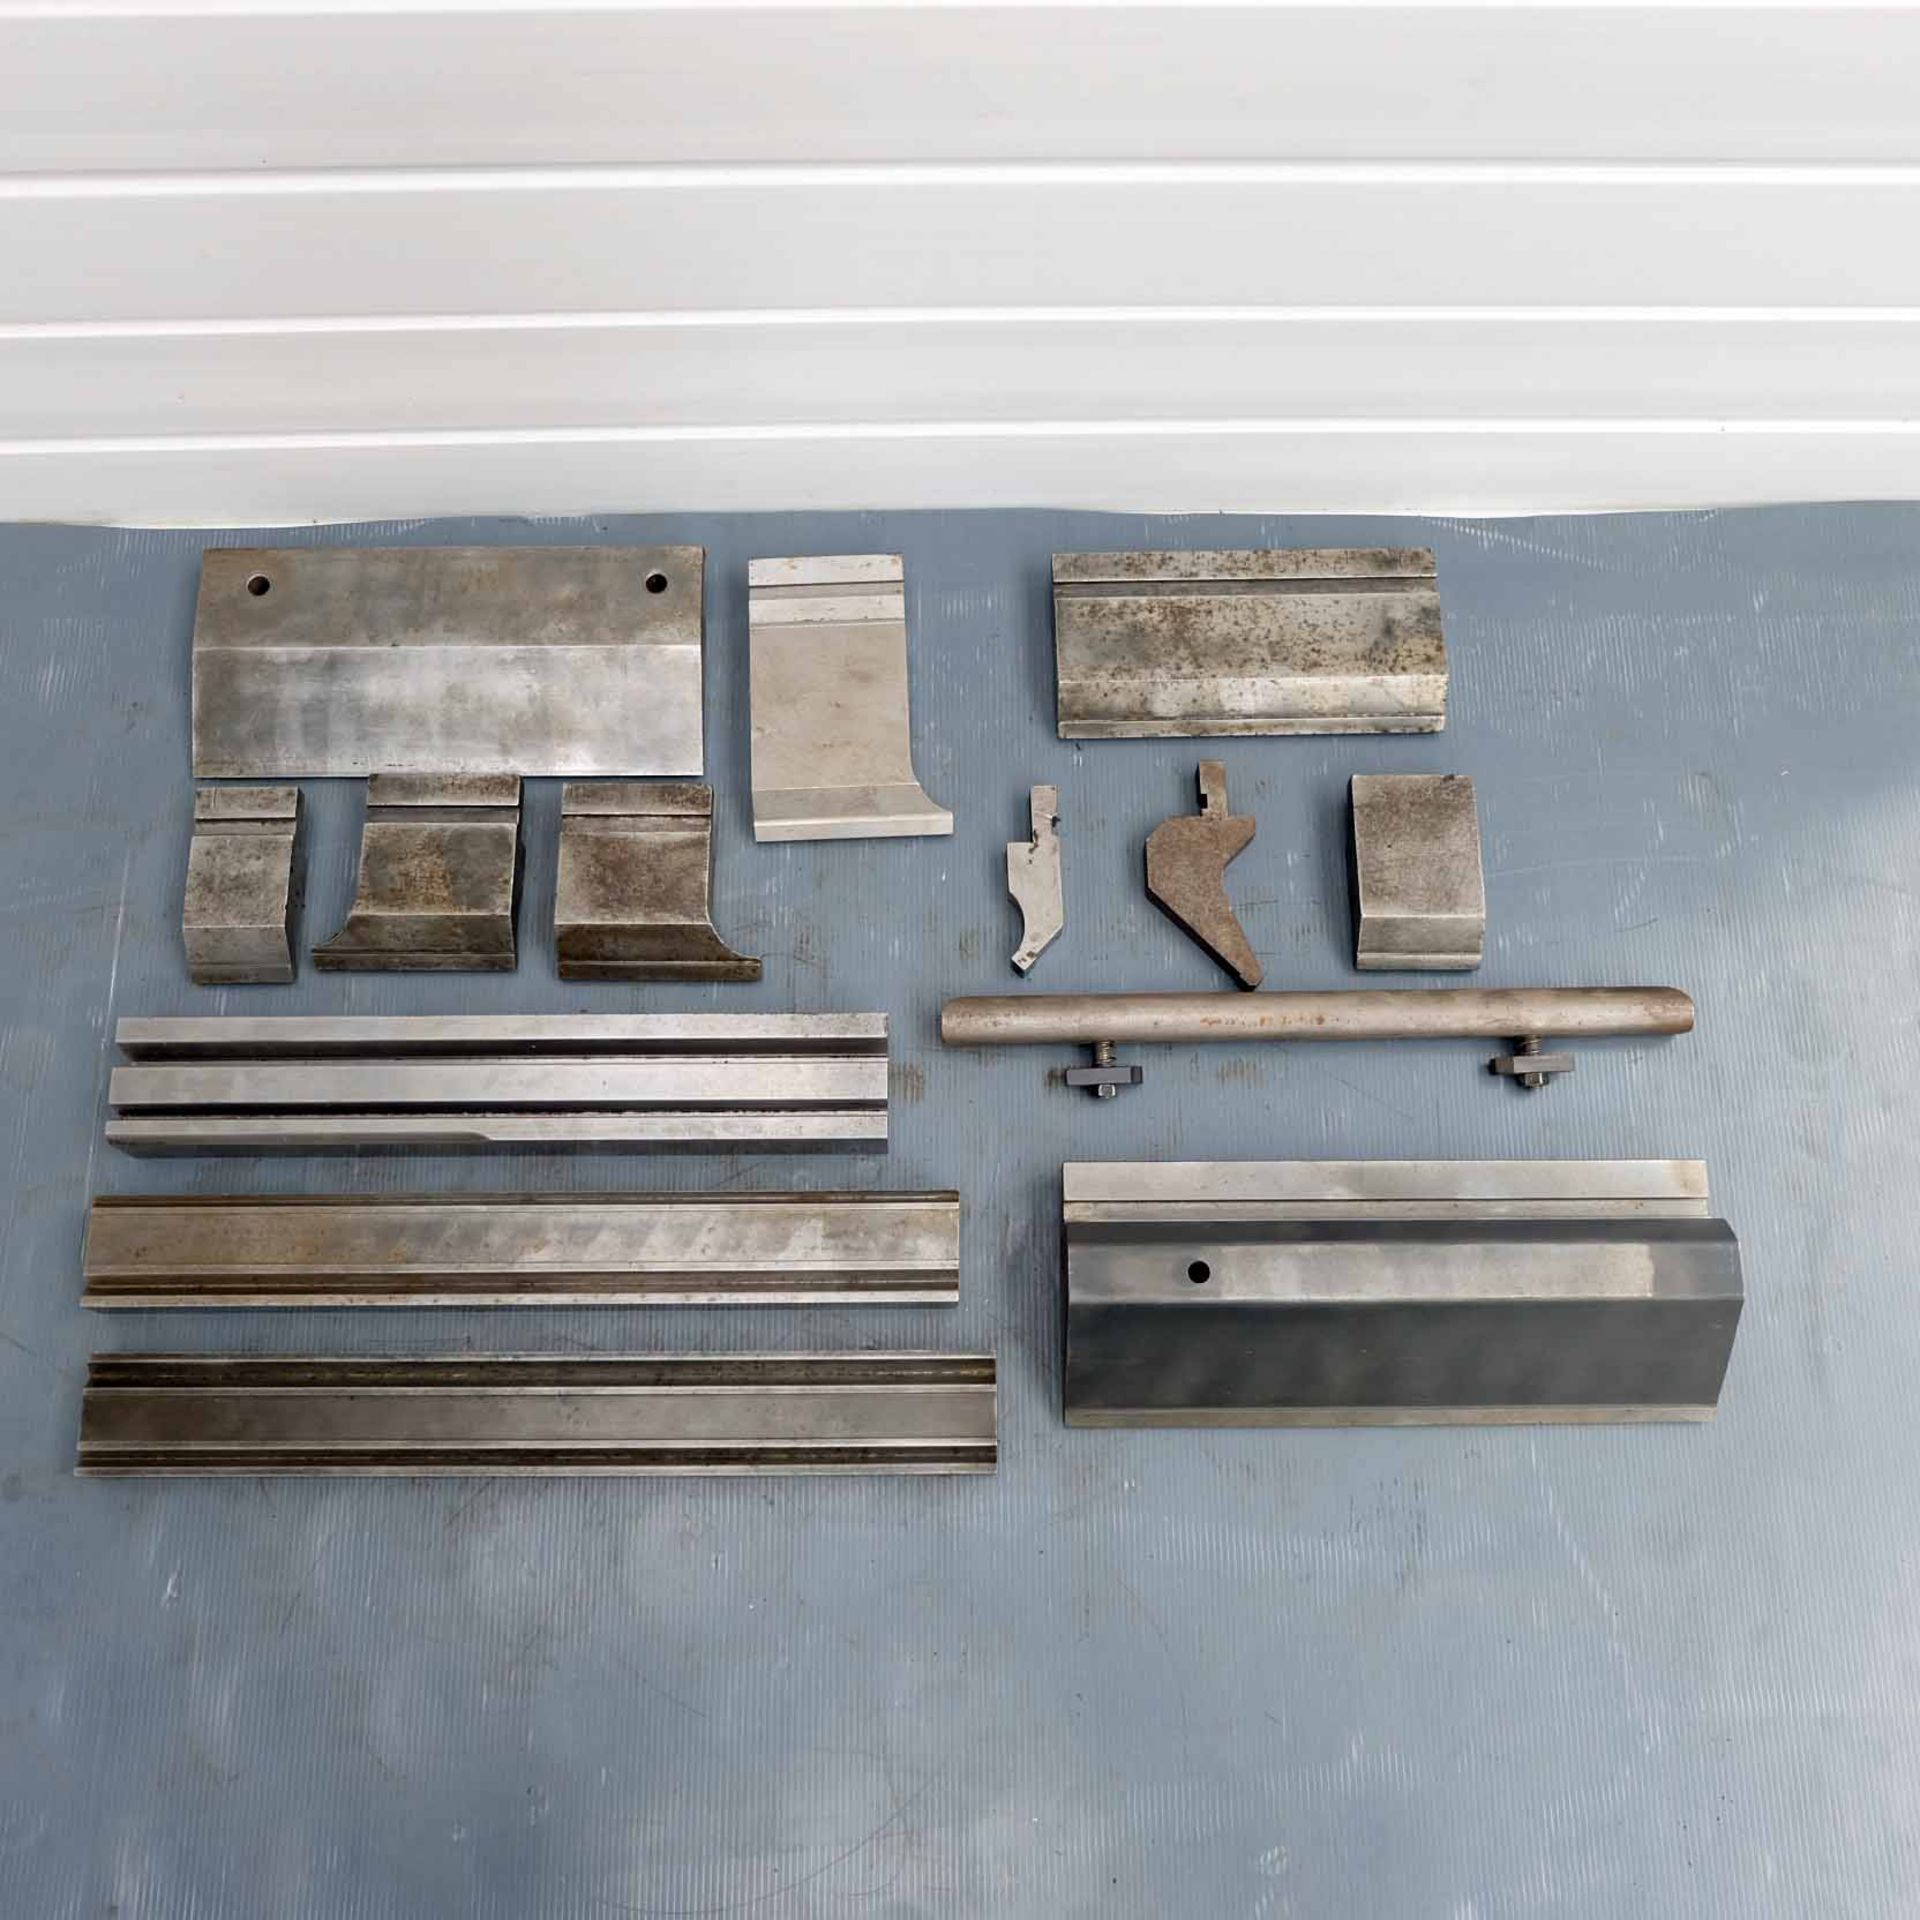 Quantity of Miscalaneous Press Brake Tooling. Various Sizes. Top & Bottom Tooling. - Image 2 of 6